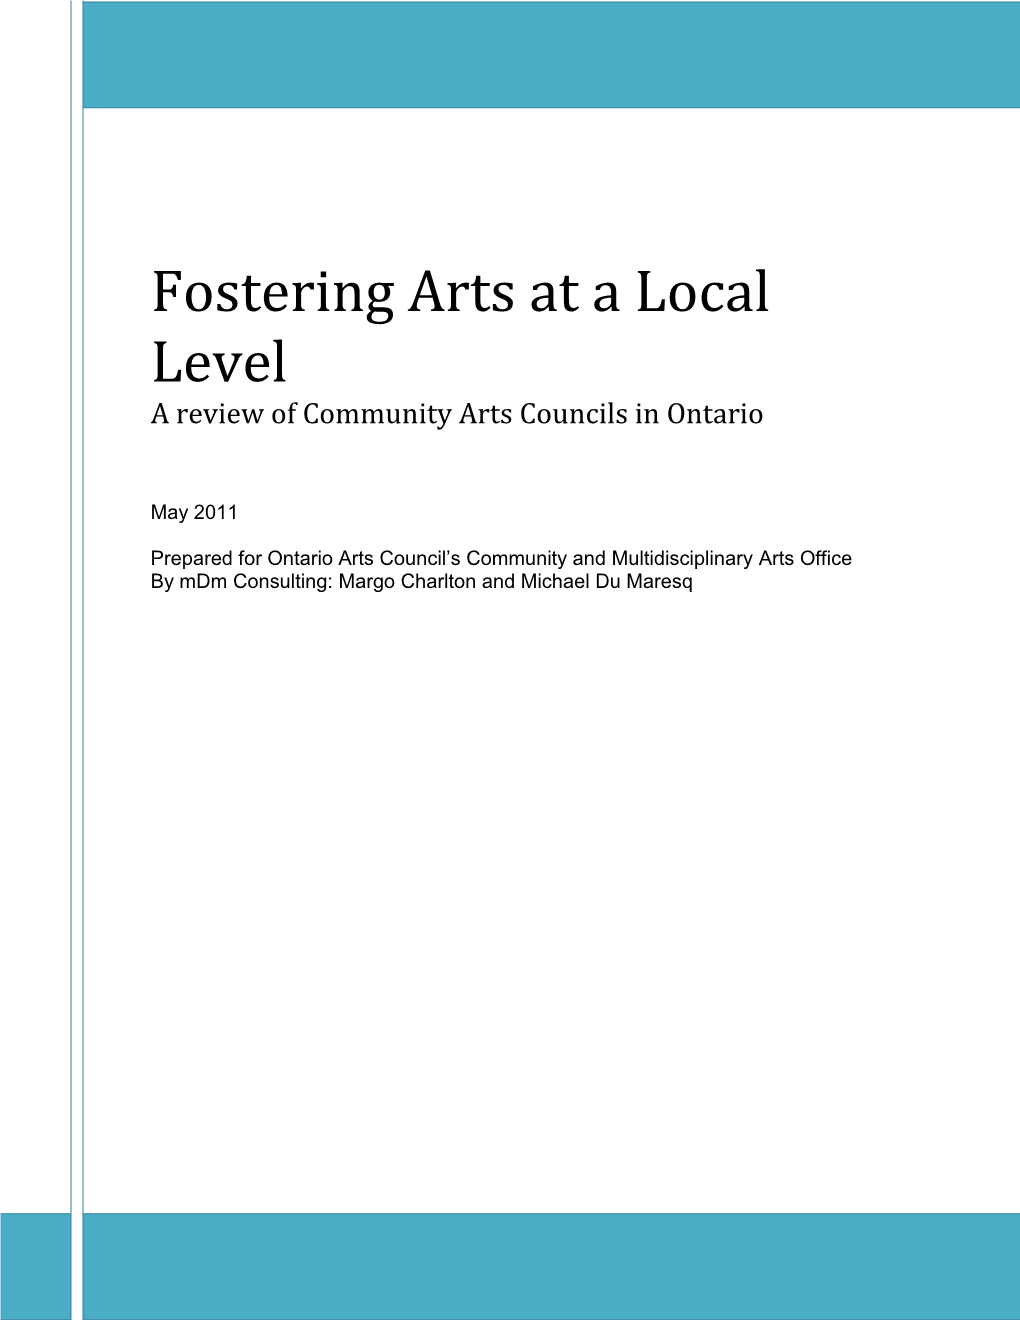 Fostering Arts at a Local Level a Review of Community Arts Councils in Ontario